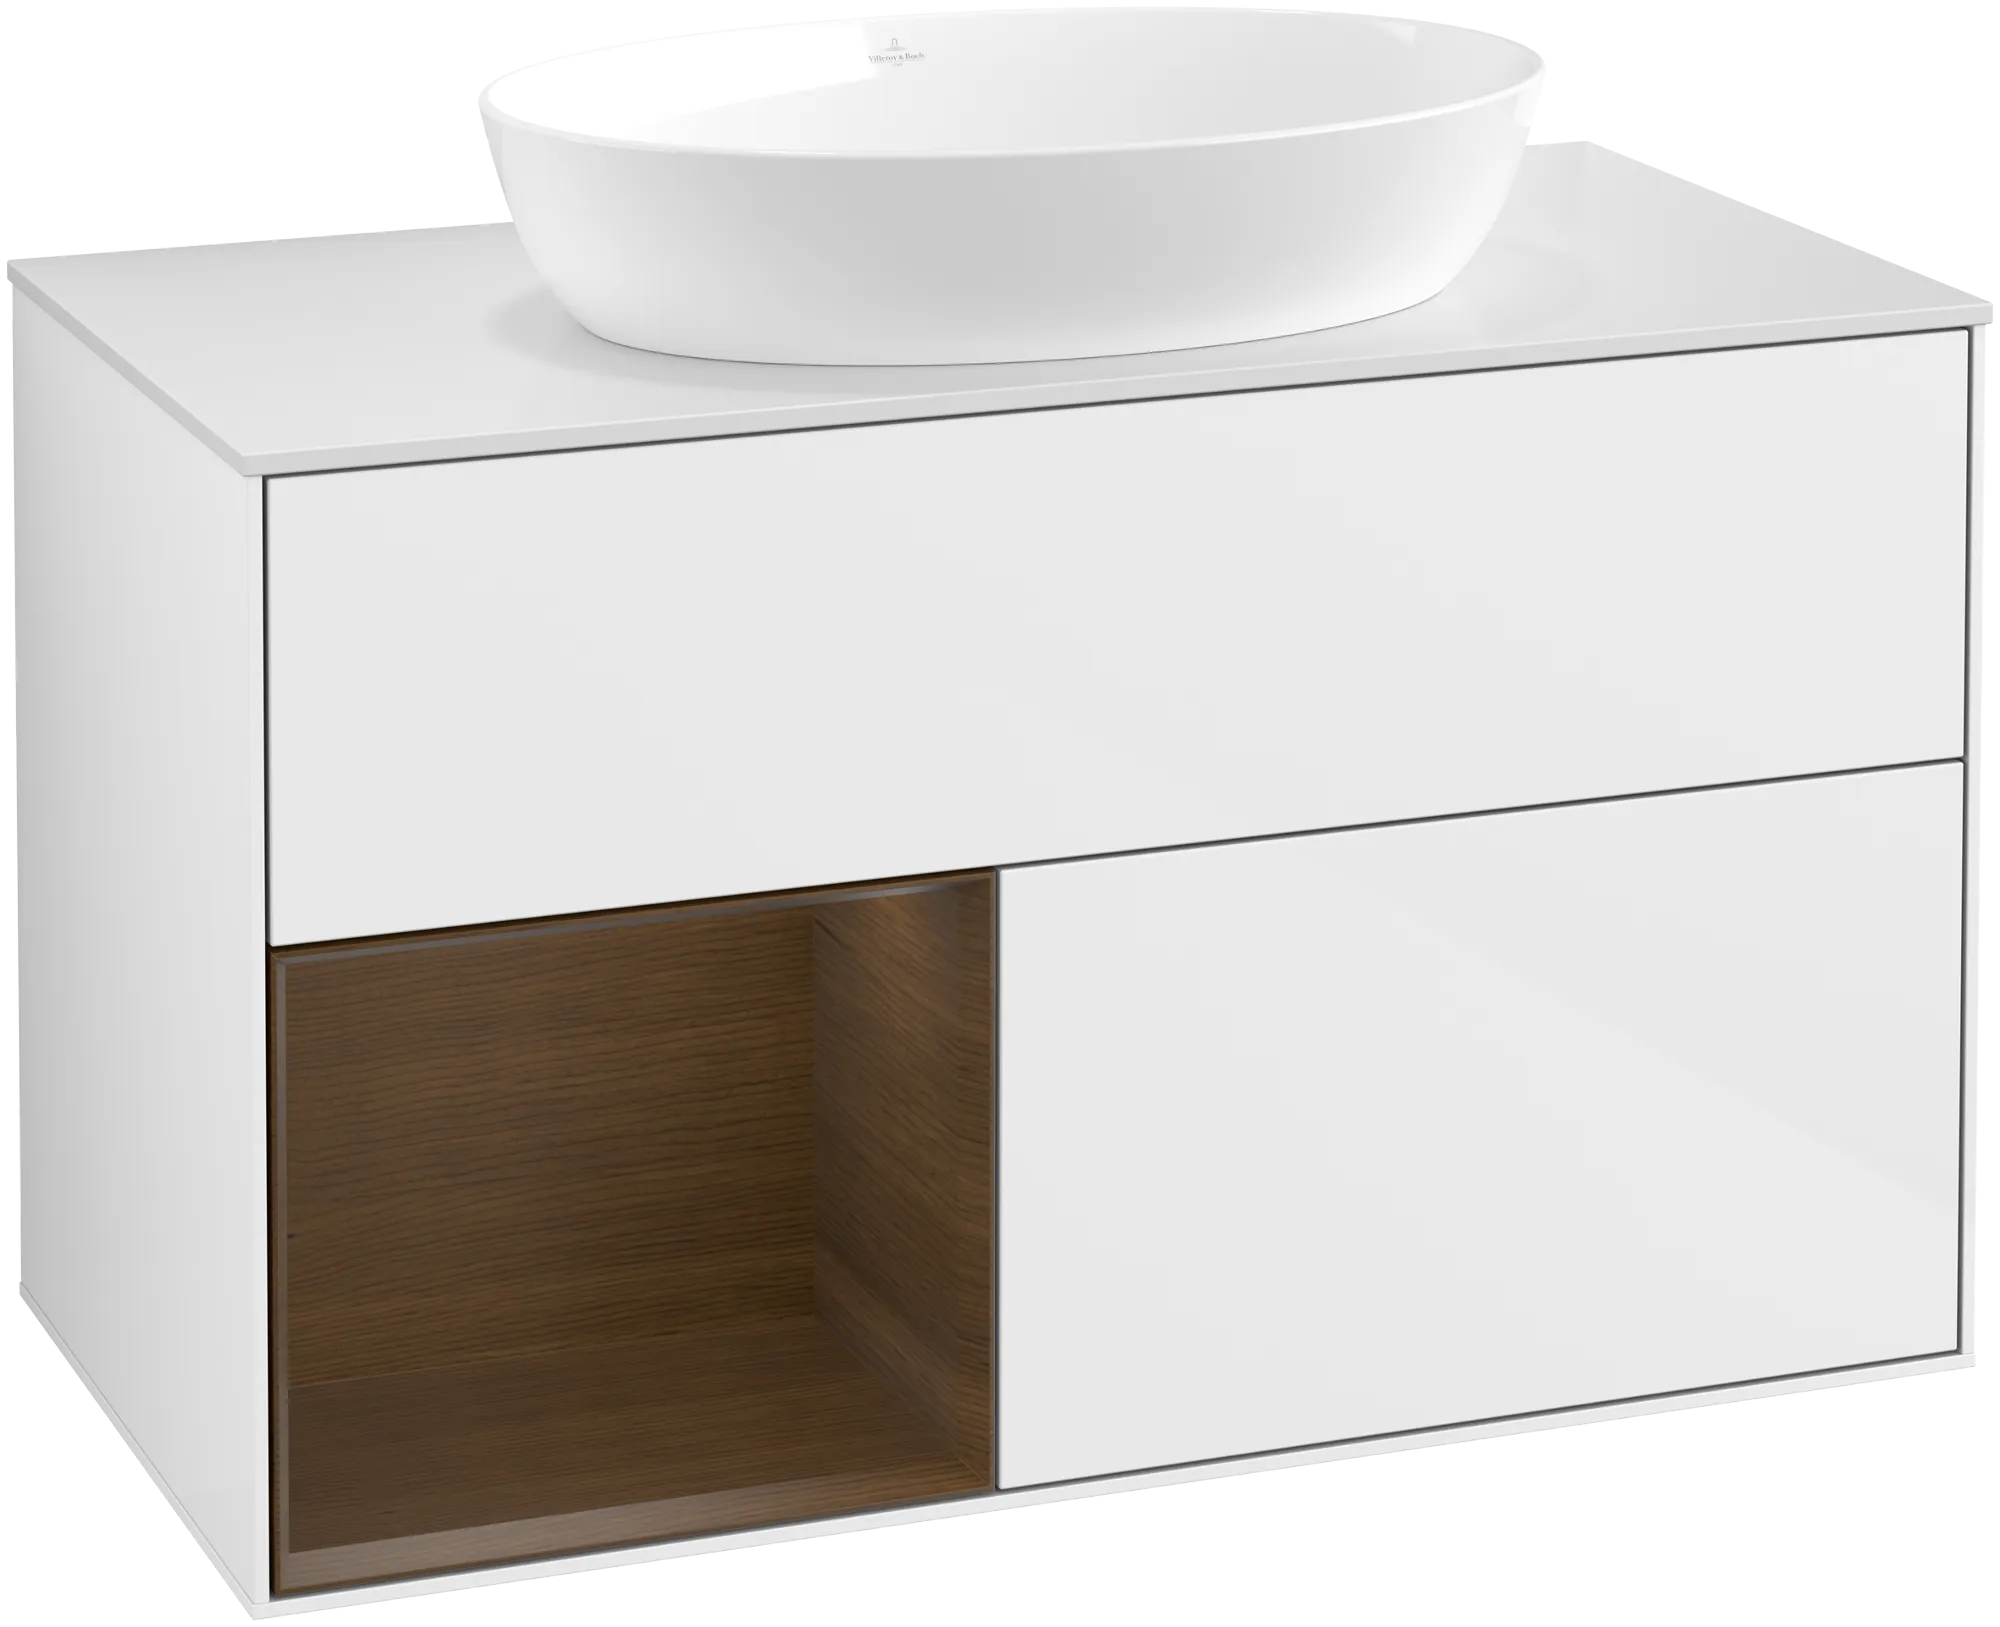 Picture of VILLEROY BOCH Finion Vanity unit, with lighting, 2 pull-out compartments, 1000 x 603 x 501 mm, Glossy White Lacquer / Walnut Veneer / Glass White Matt #GA11GNGF